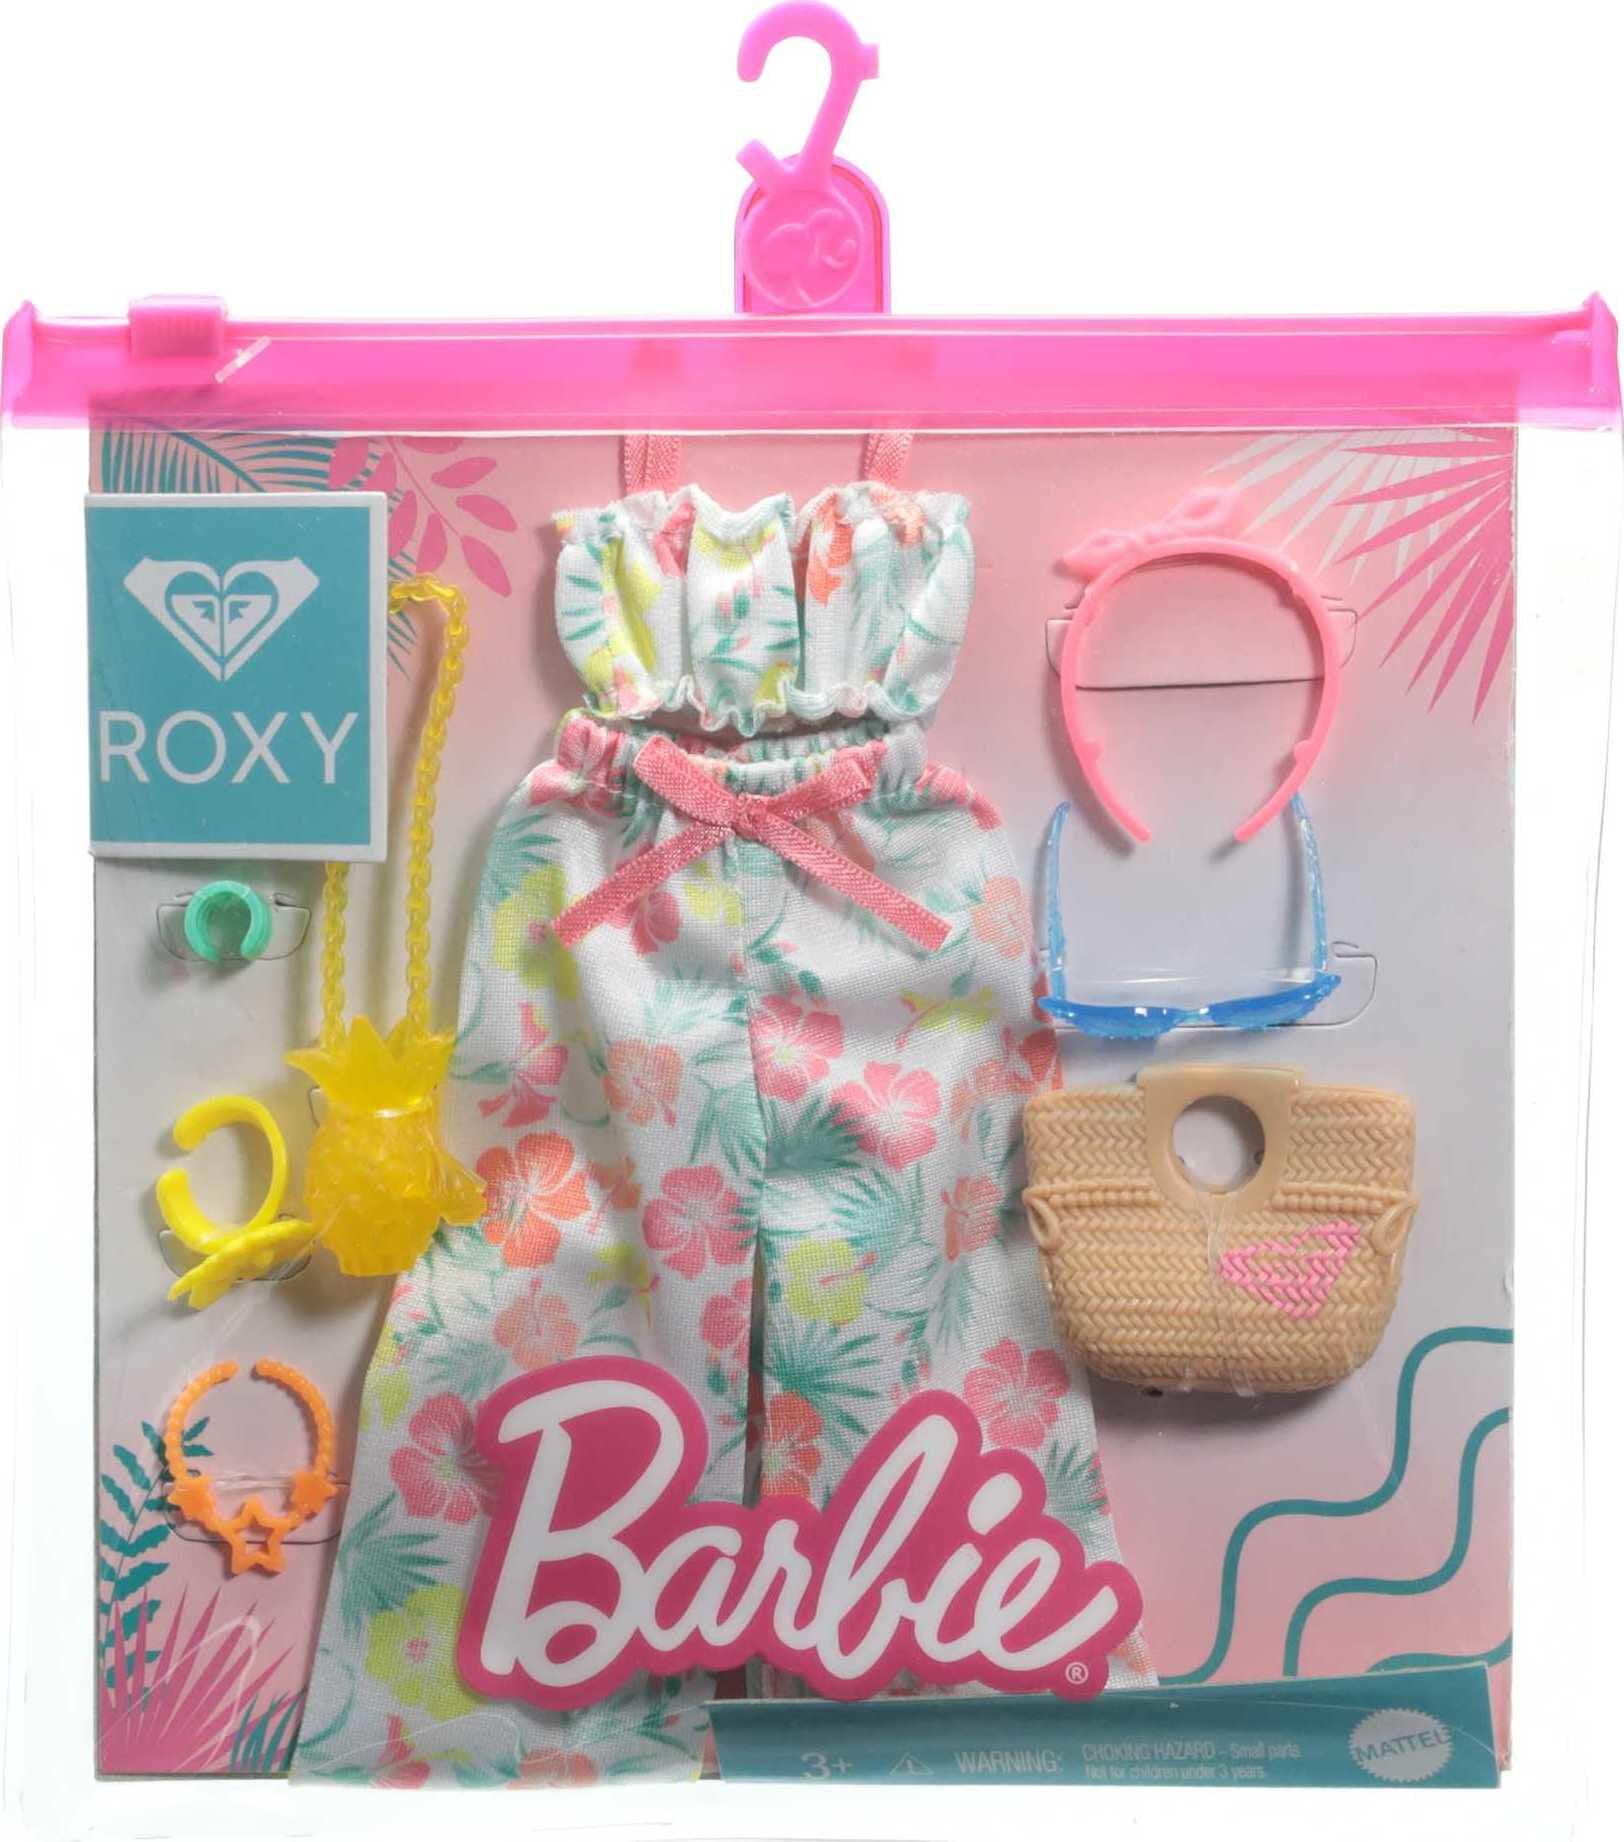  Barbie Storytelling Carnival Accessories Fashion Pack PLAYSET  GHX35 : Toys & Games